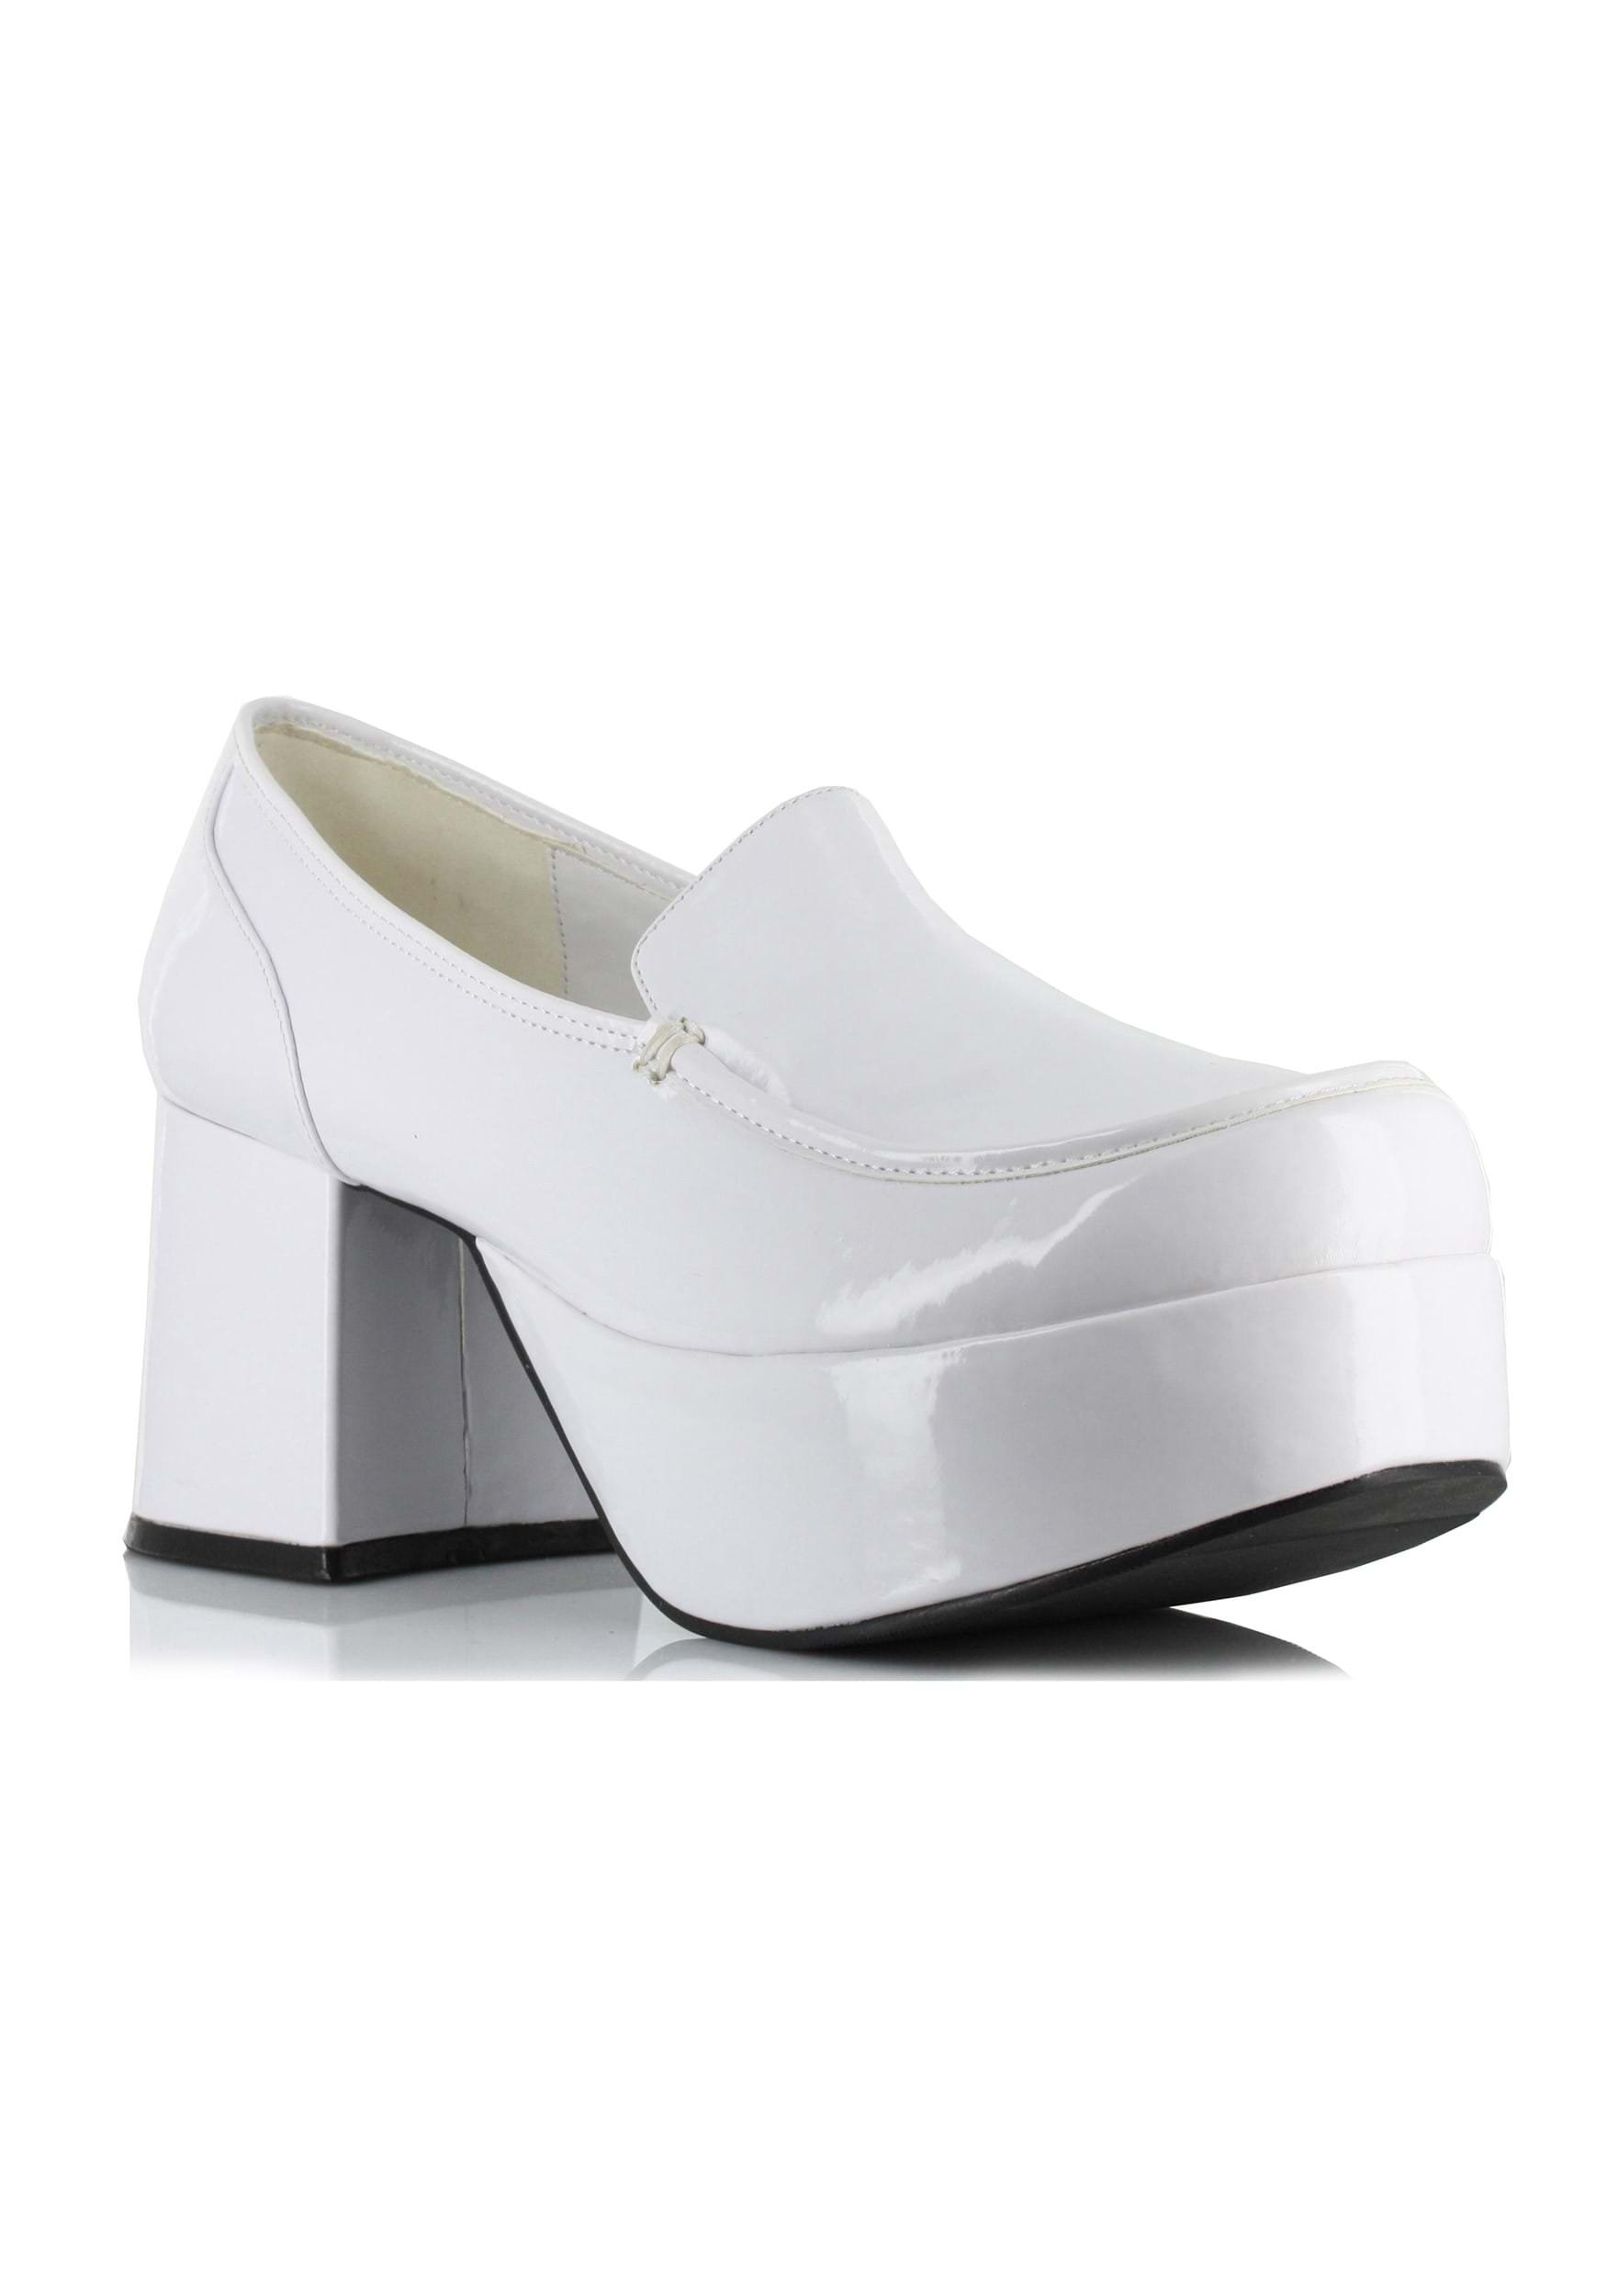 Image of White Daddio Pimp Men's Shoes ID EE312DADDIOWH-L